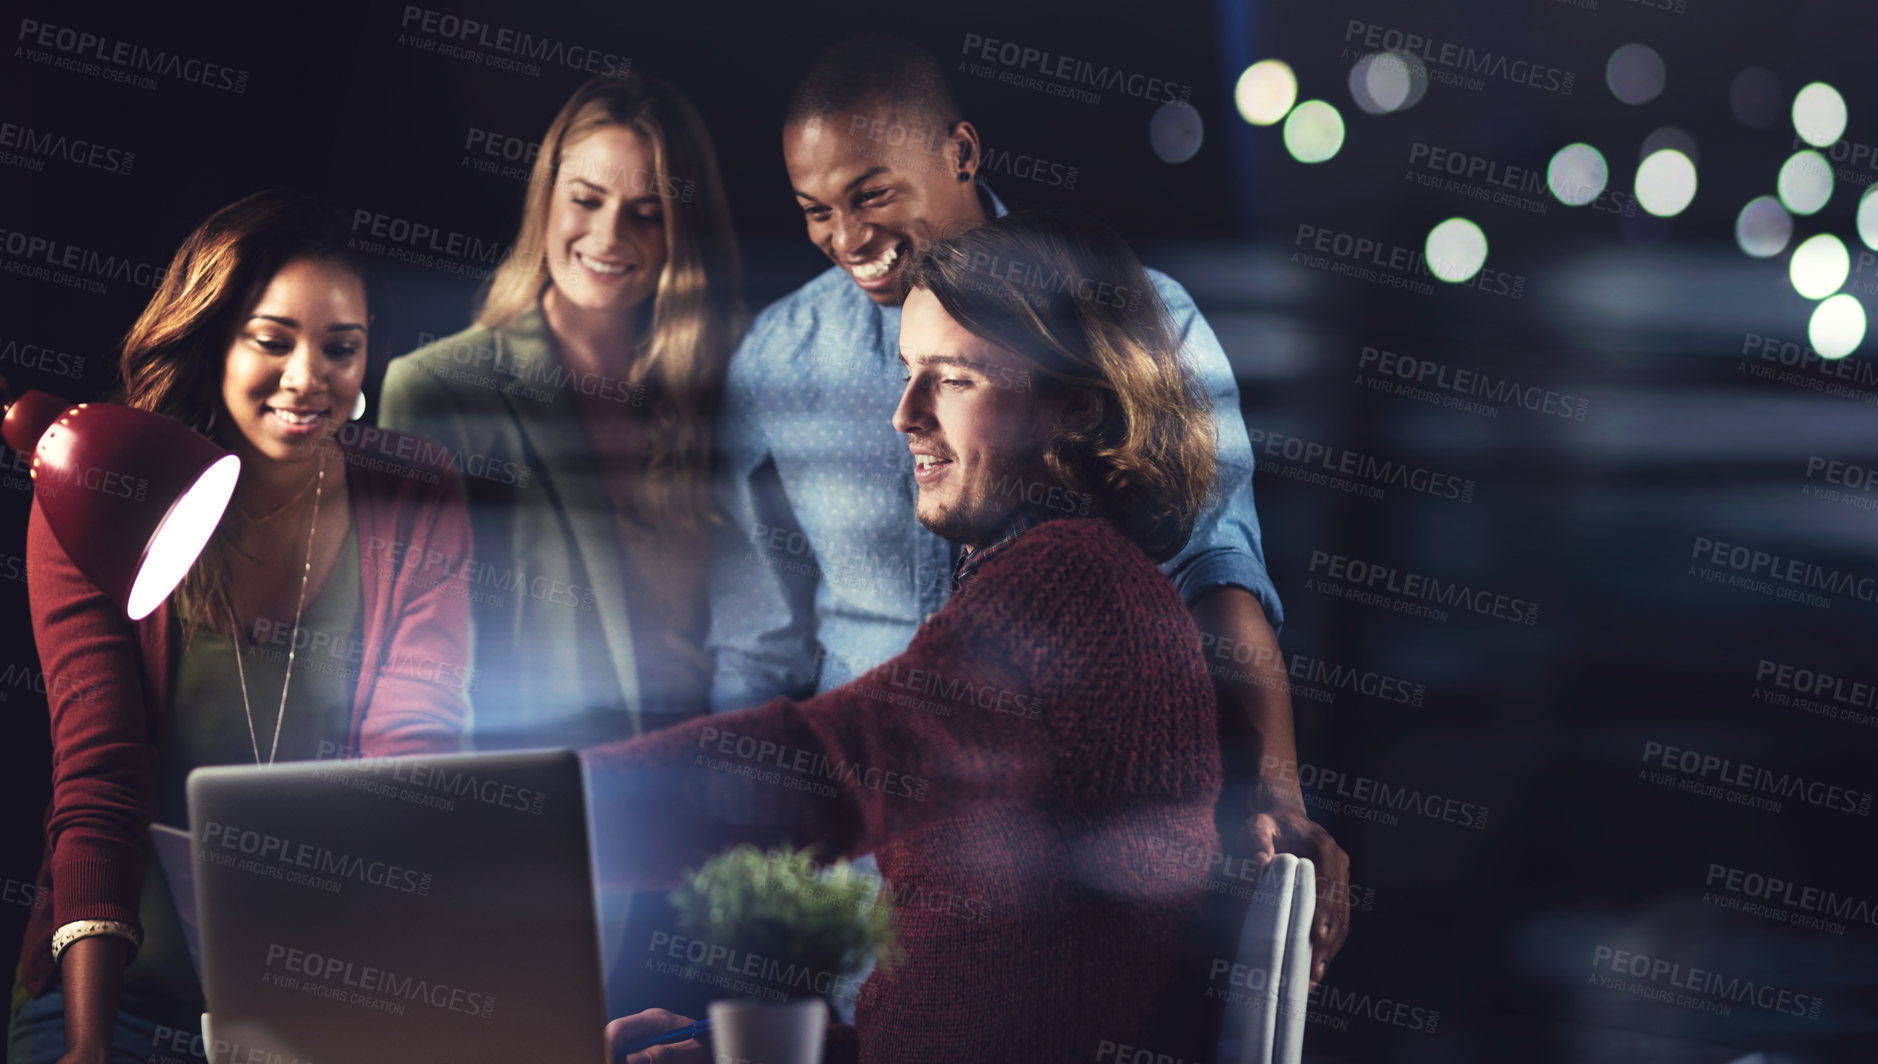 Buy stock photo Shot of a group of colleagues working late in the office together